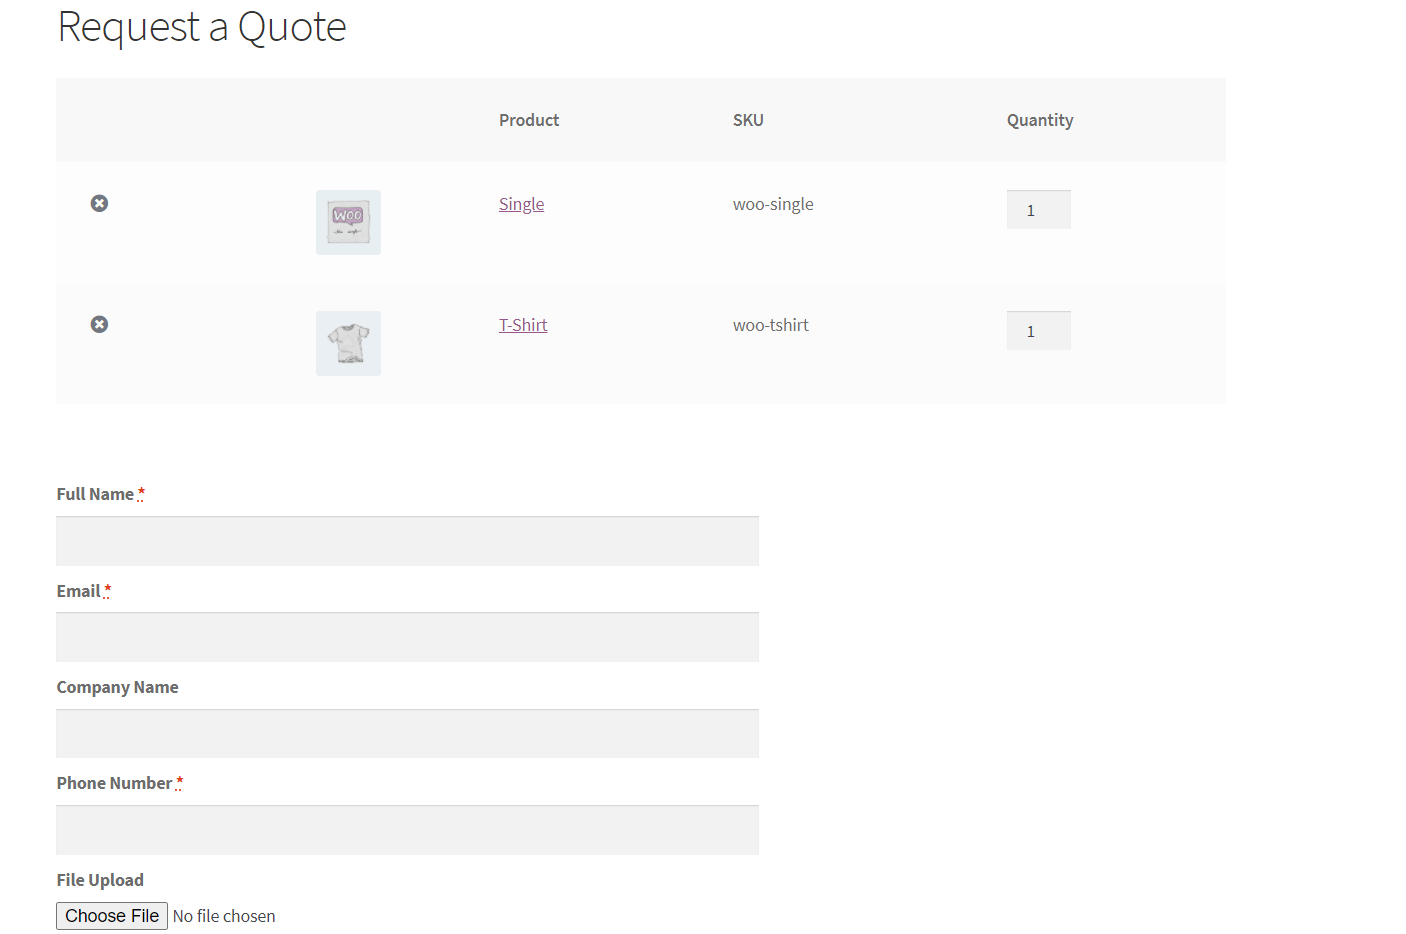 WooCommerce request a quote pages